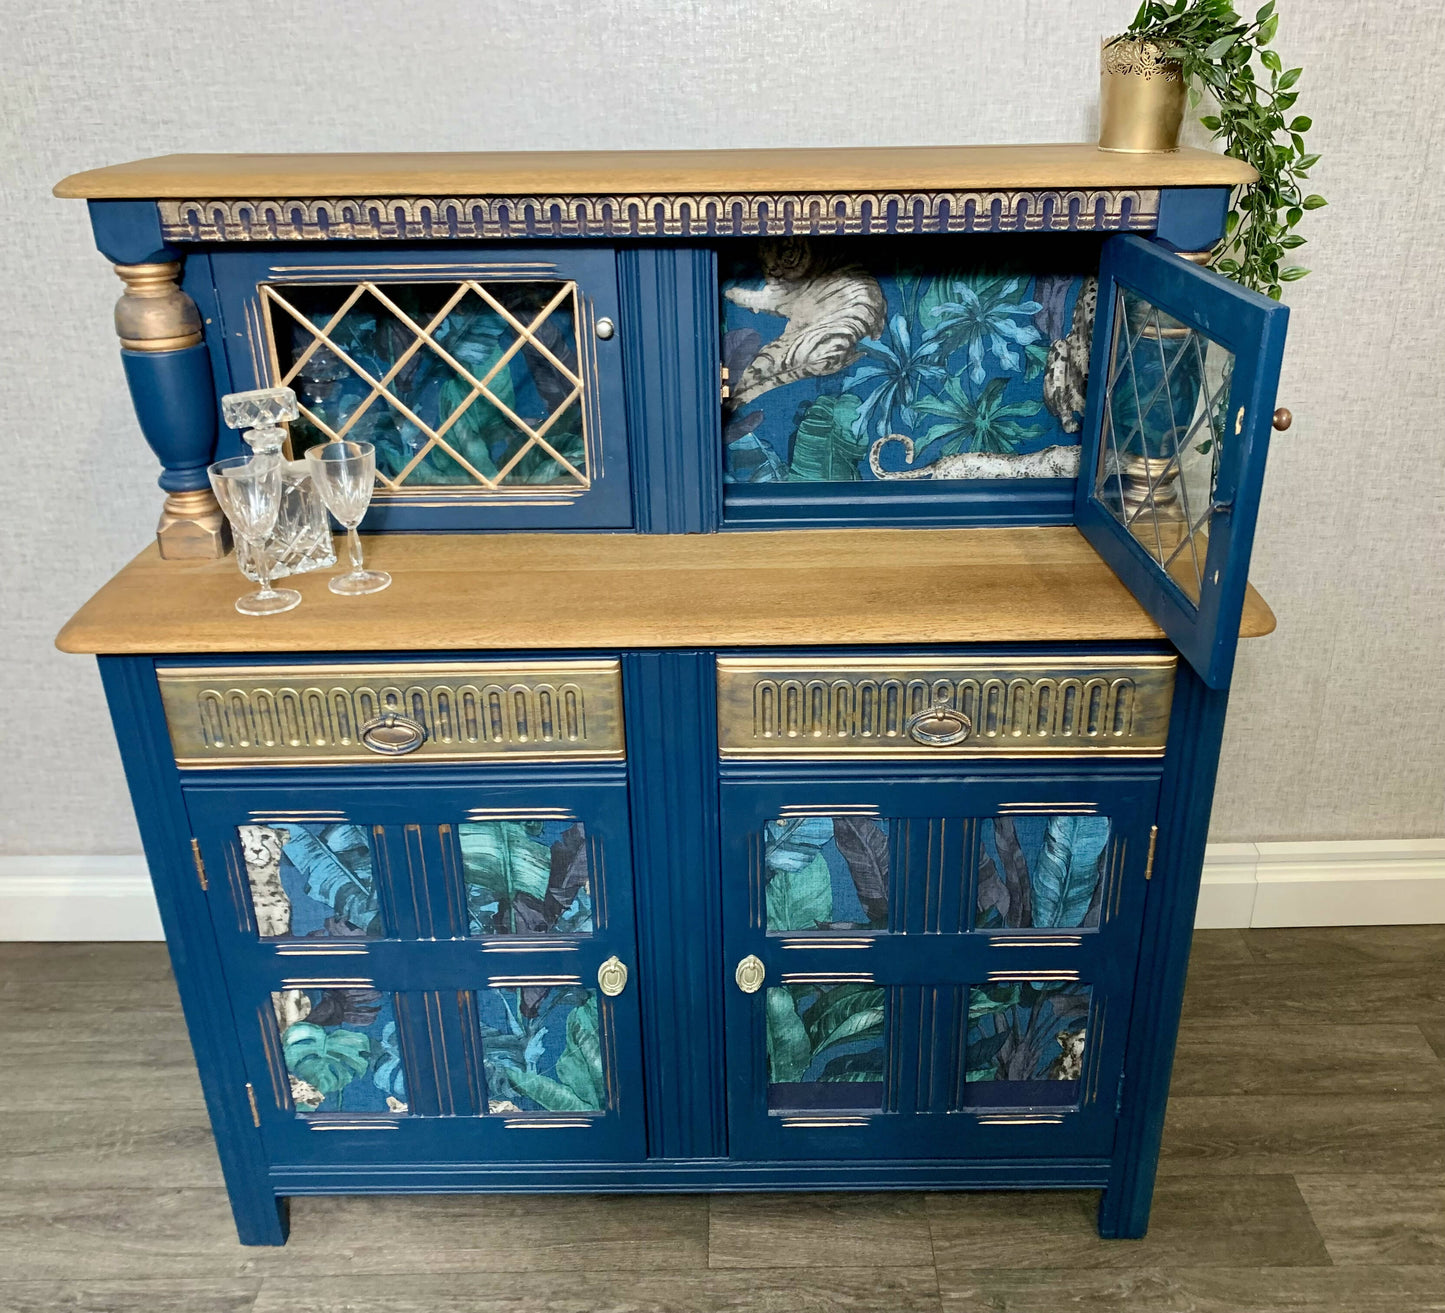 SOLD - Priory Drinks Cabinet